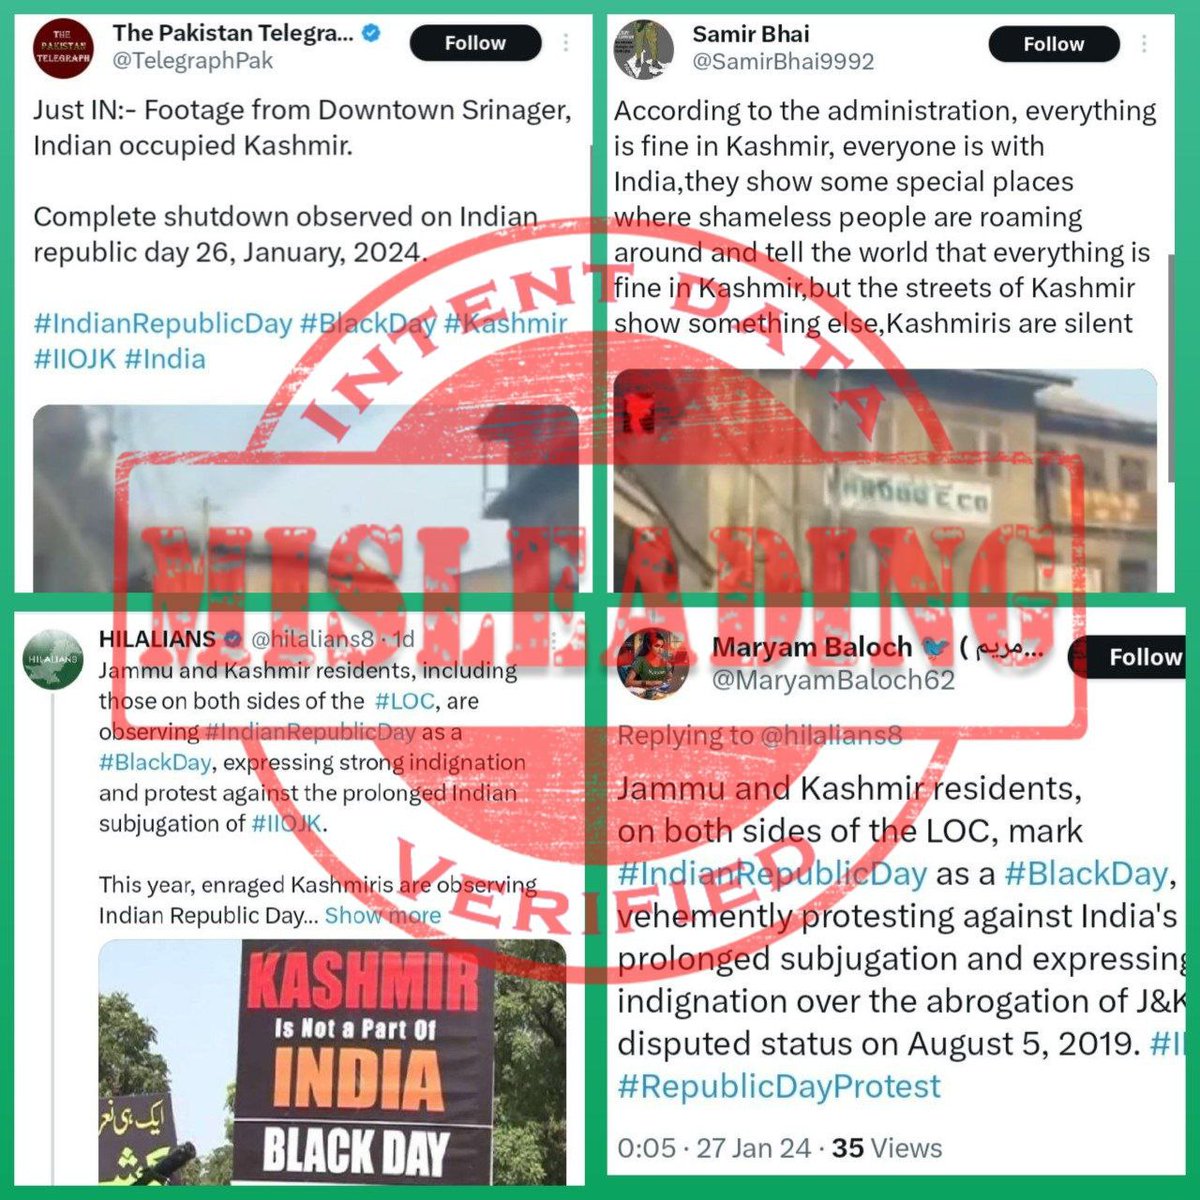 1567
ANALYSIS: Misleading

FACT: Pakistan-based propaganda accounts are circulating self-invented stories claiming that Kashmiri residents from both sides, POK and J&K, mark #IndianRepublicDay as a Black Day, (1/4)